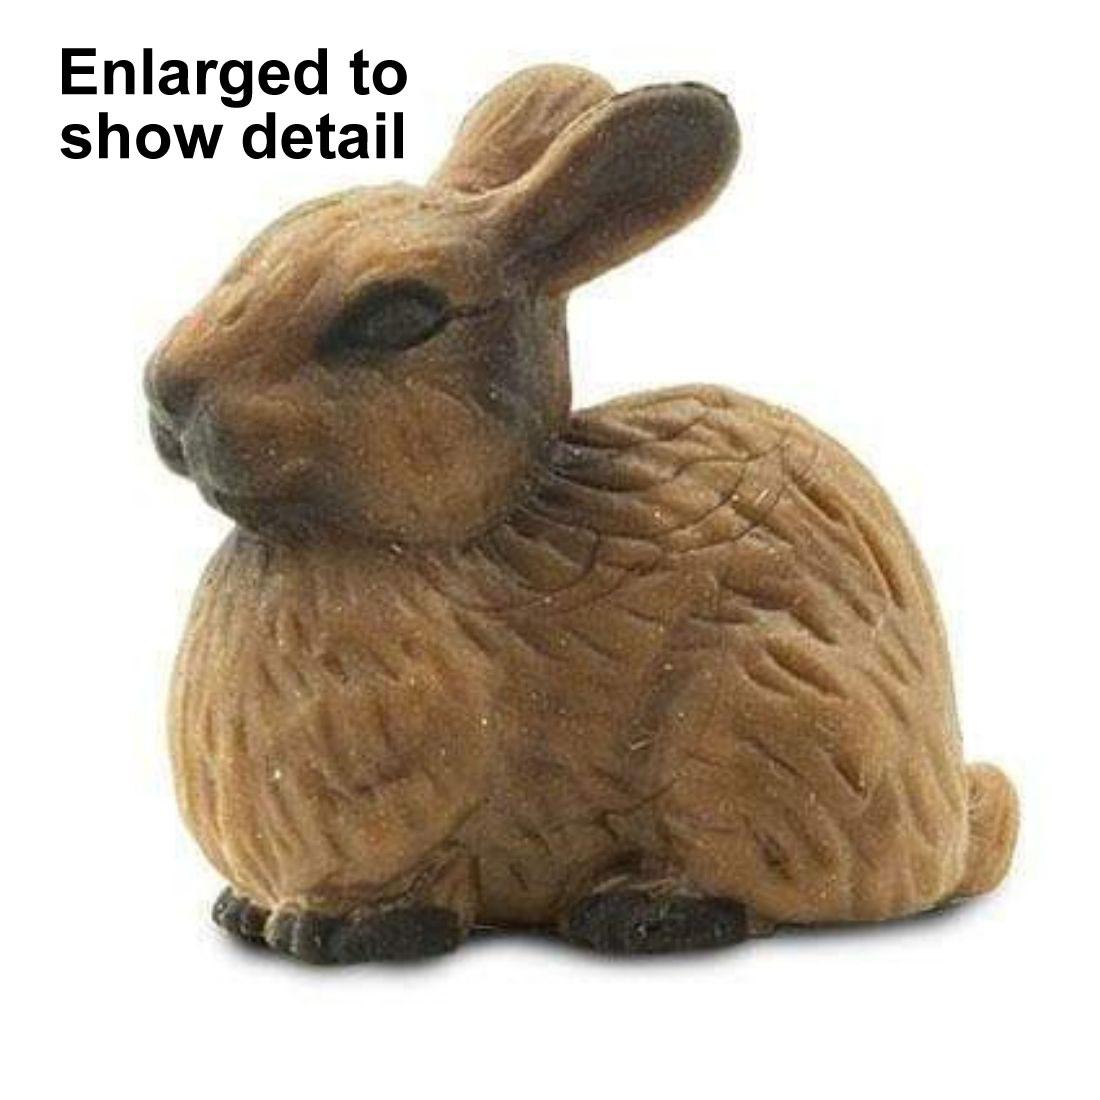 Rabbit Mini Figurine with the text Enlarged to Show Detail